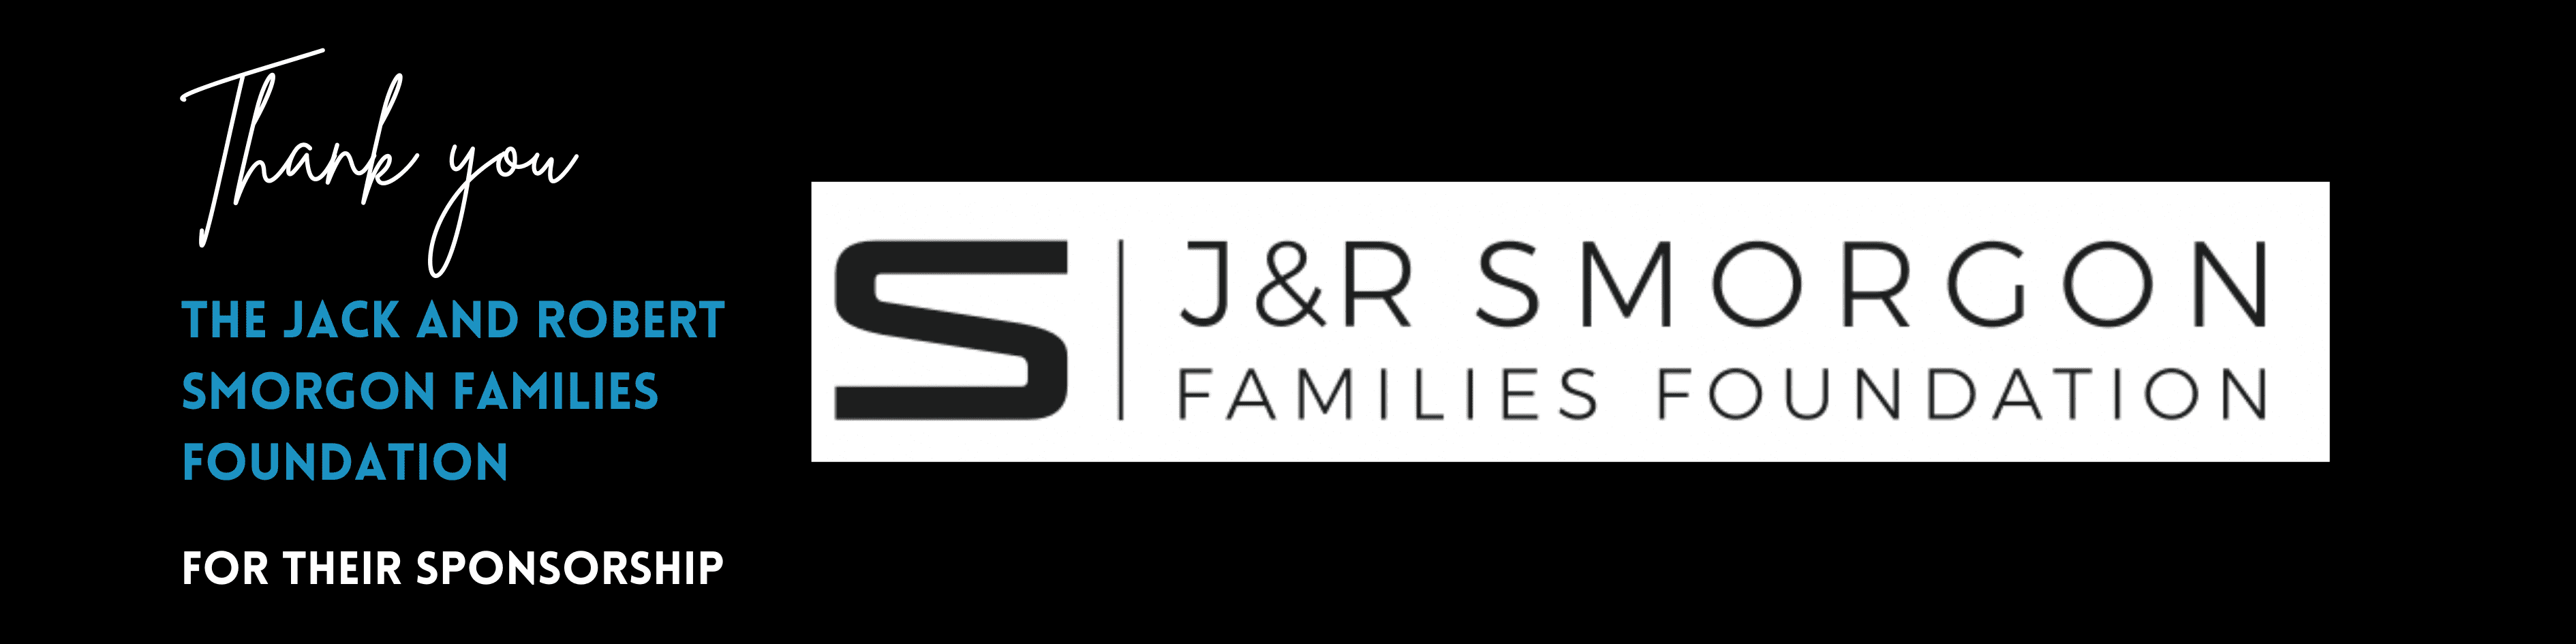 Thank you to J&R Smorgon Families foundation for proudly sponsoring this section